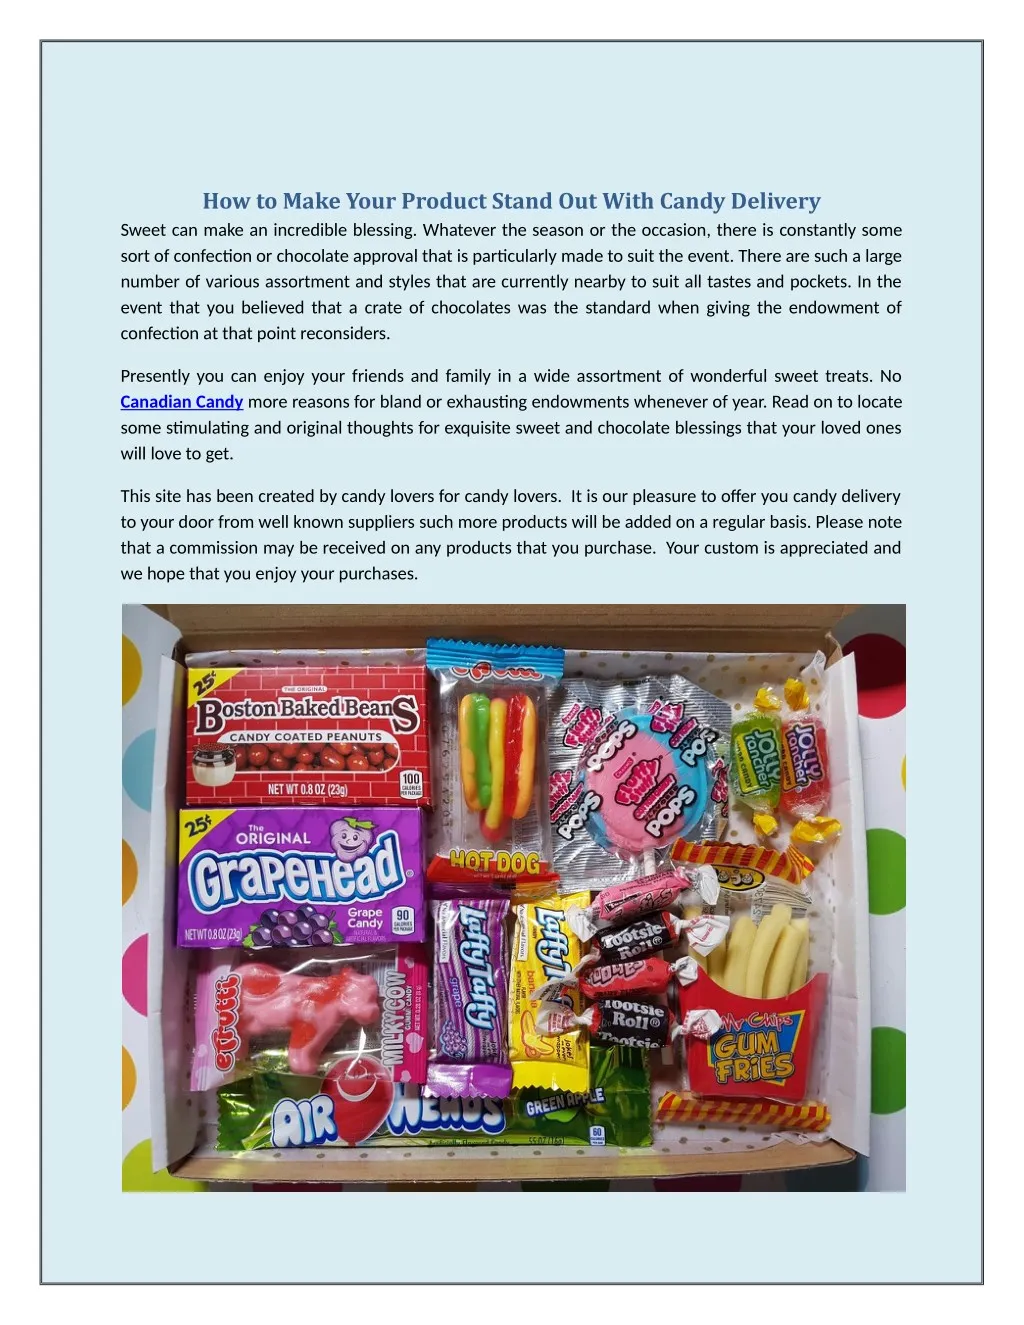 how to make your product stand out with candy